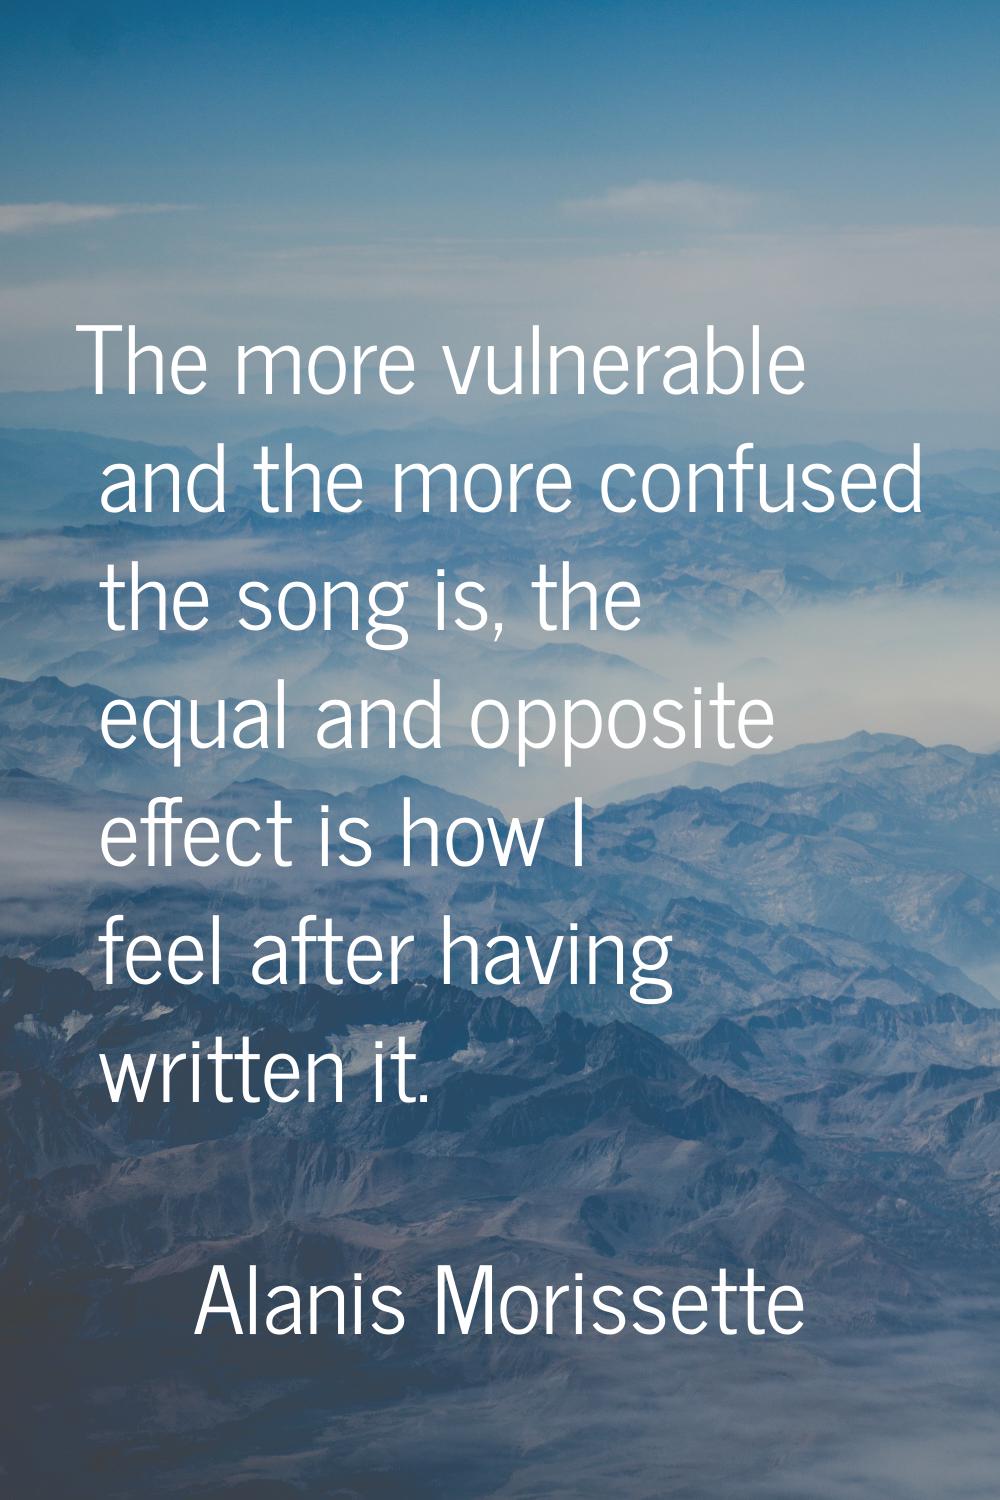 The more vulnerable and the more confused the song is, the equal and opposite effect is how I feel 